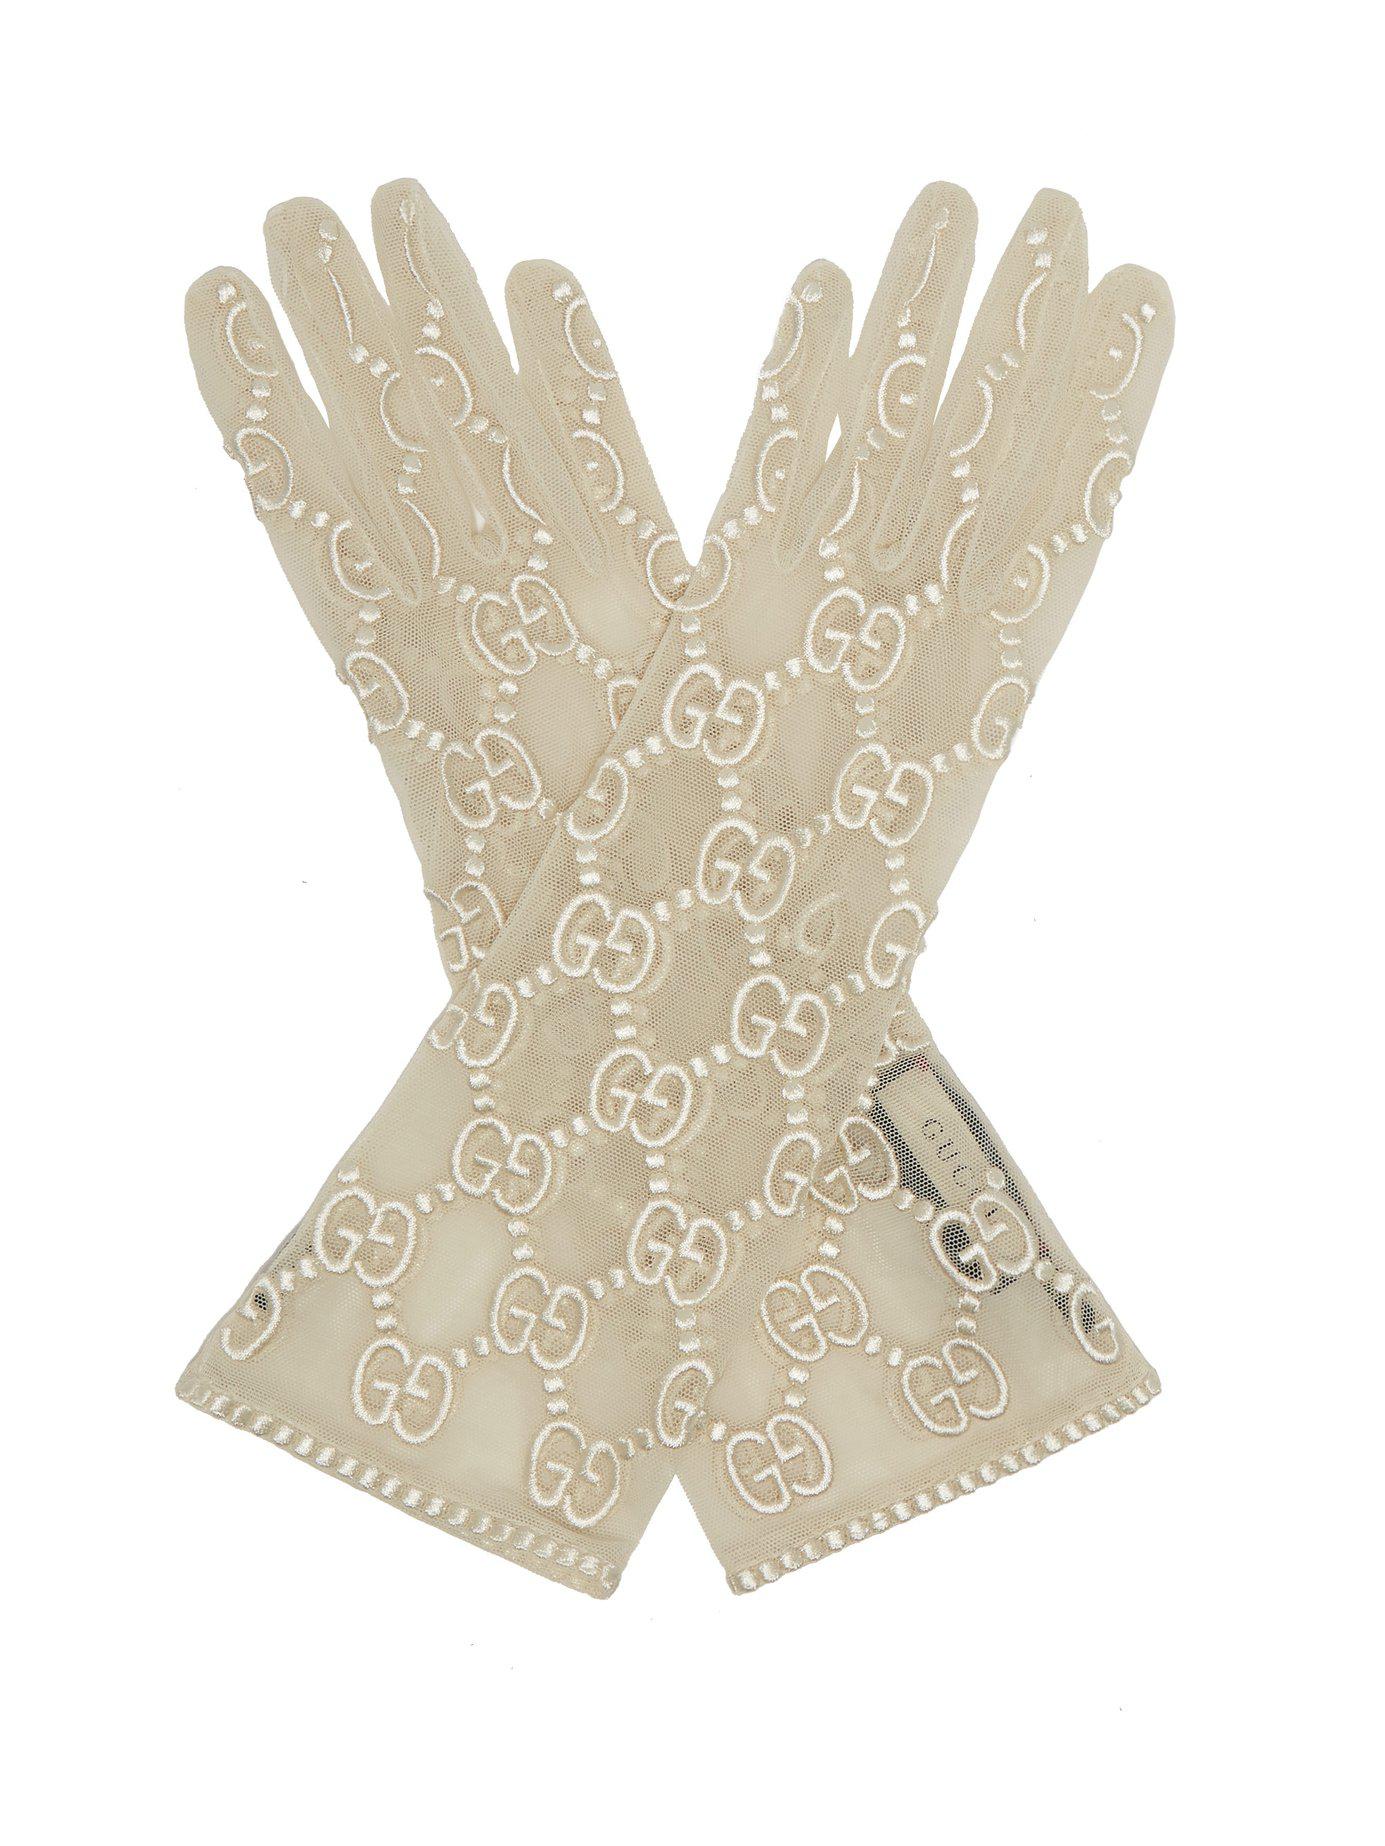 Gucci Gg Embroidered Lace Gloves in White - Lyst